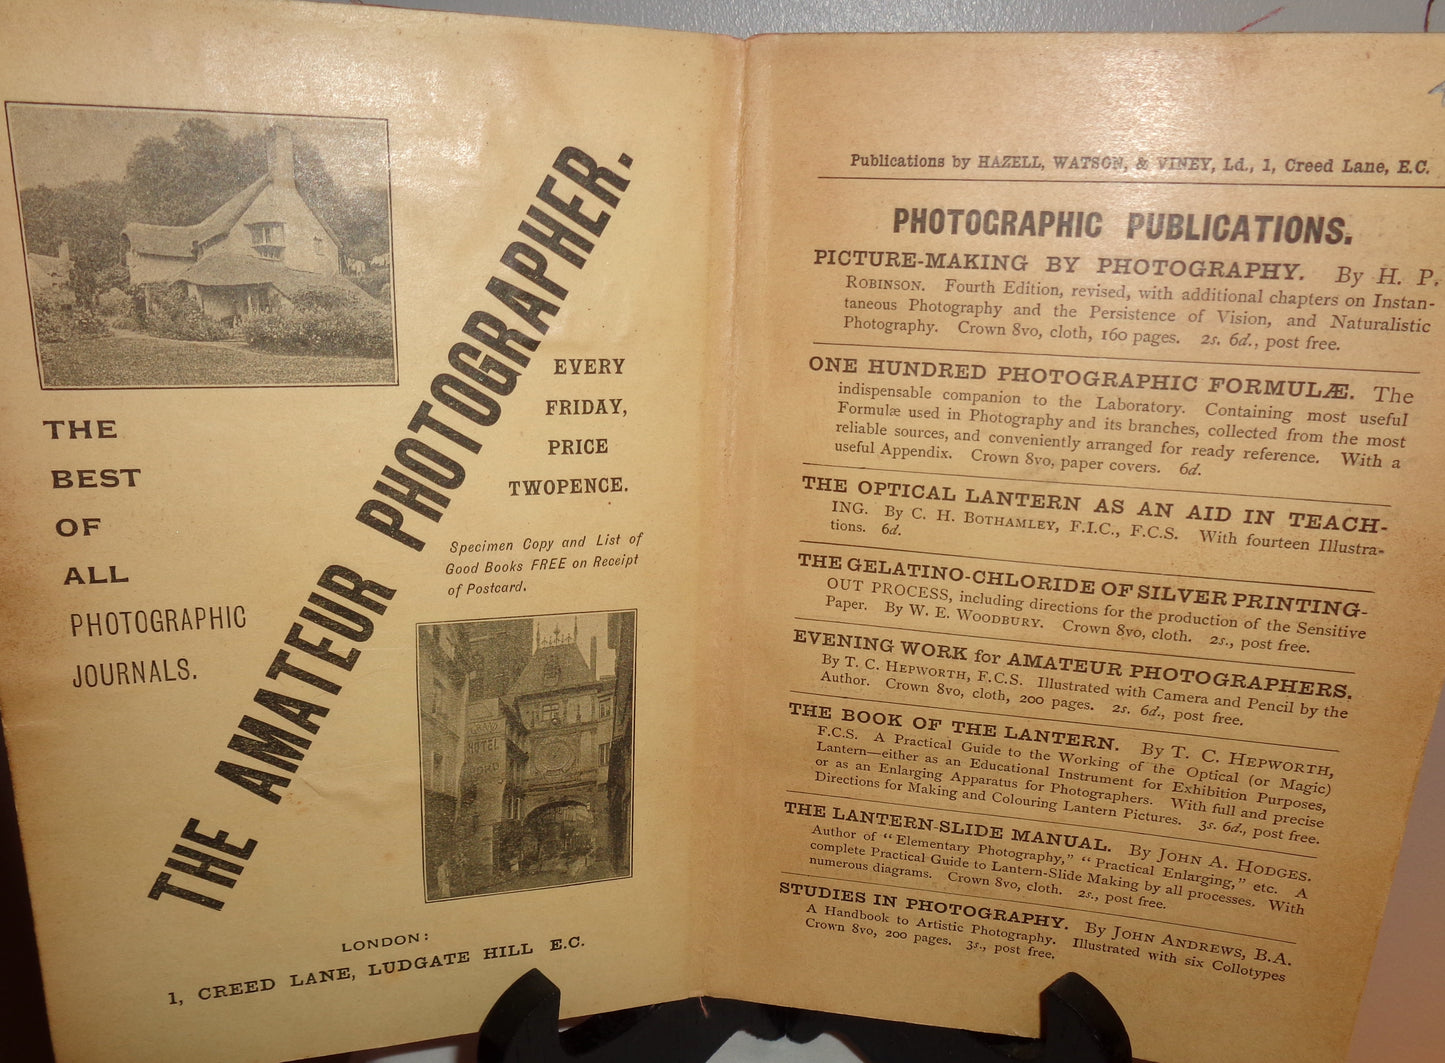 1897 Antique Photography Book on Carbon Printing By EJ Wall